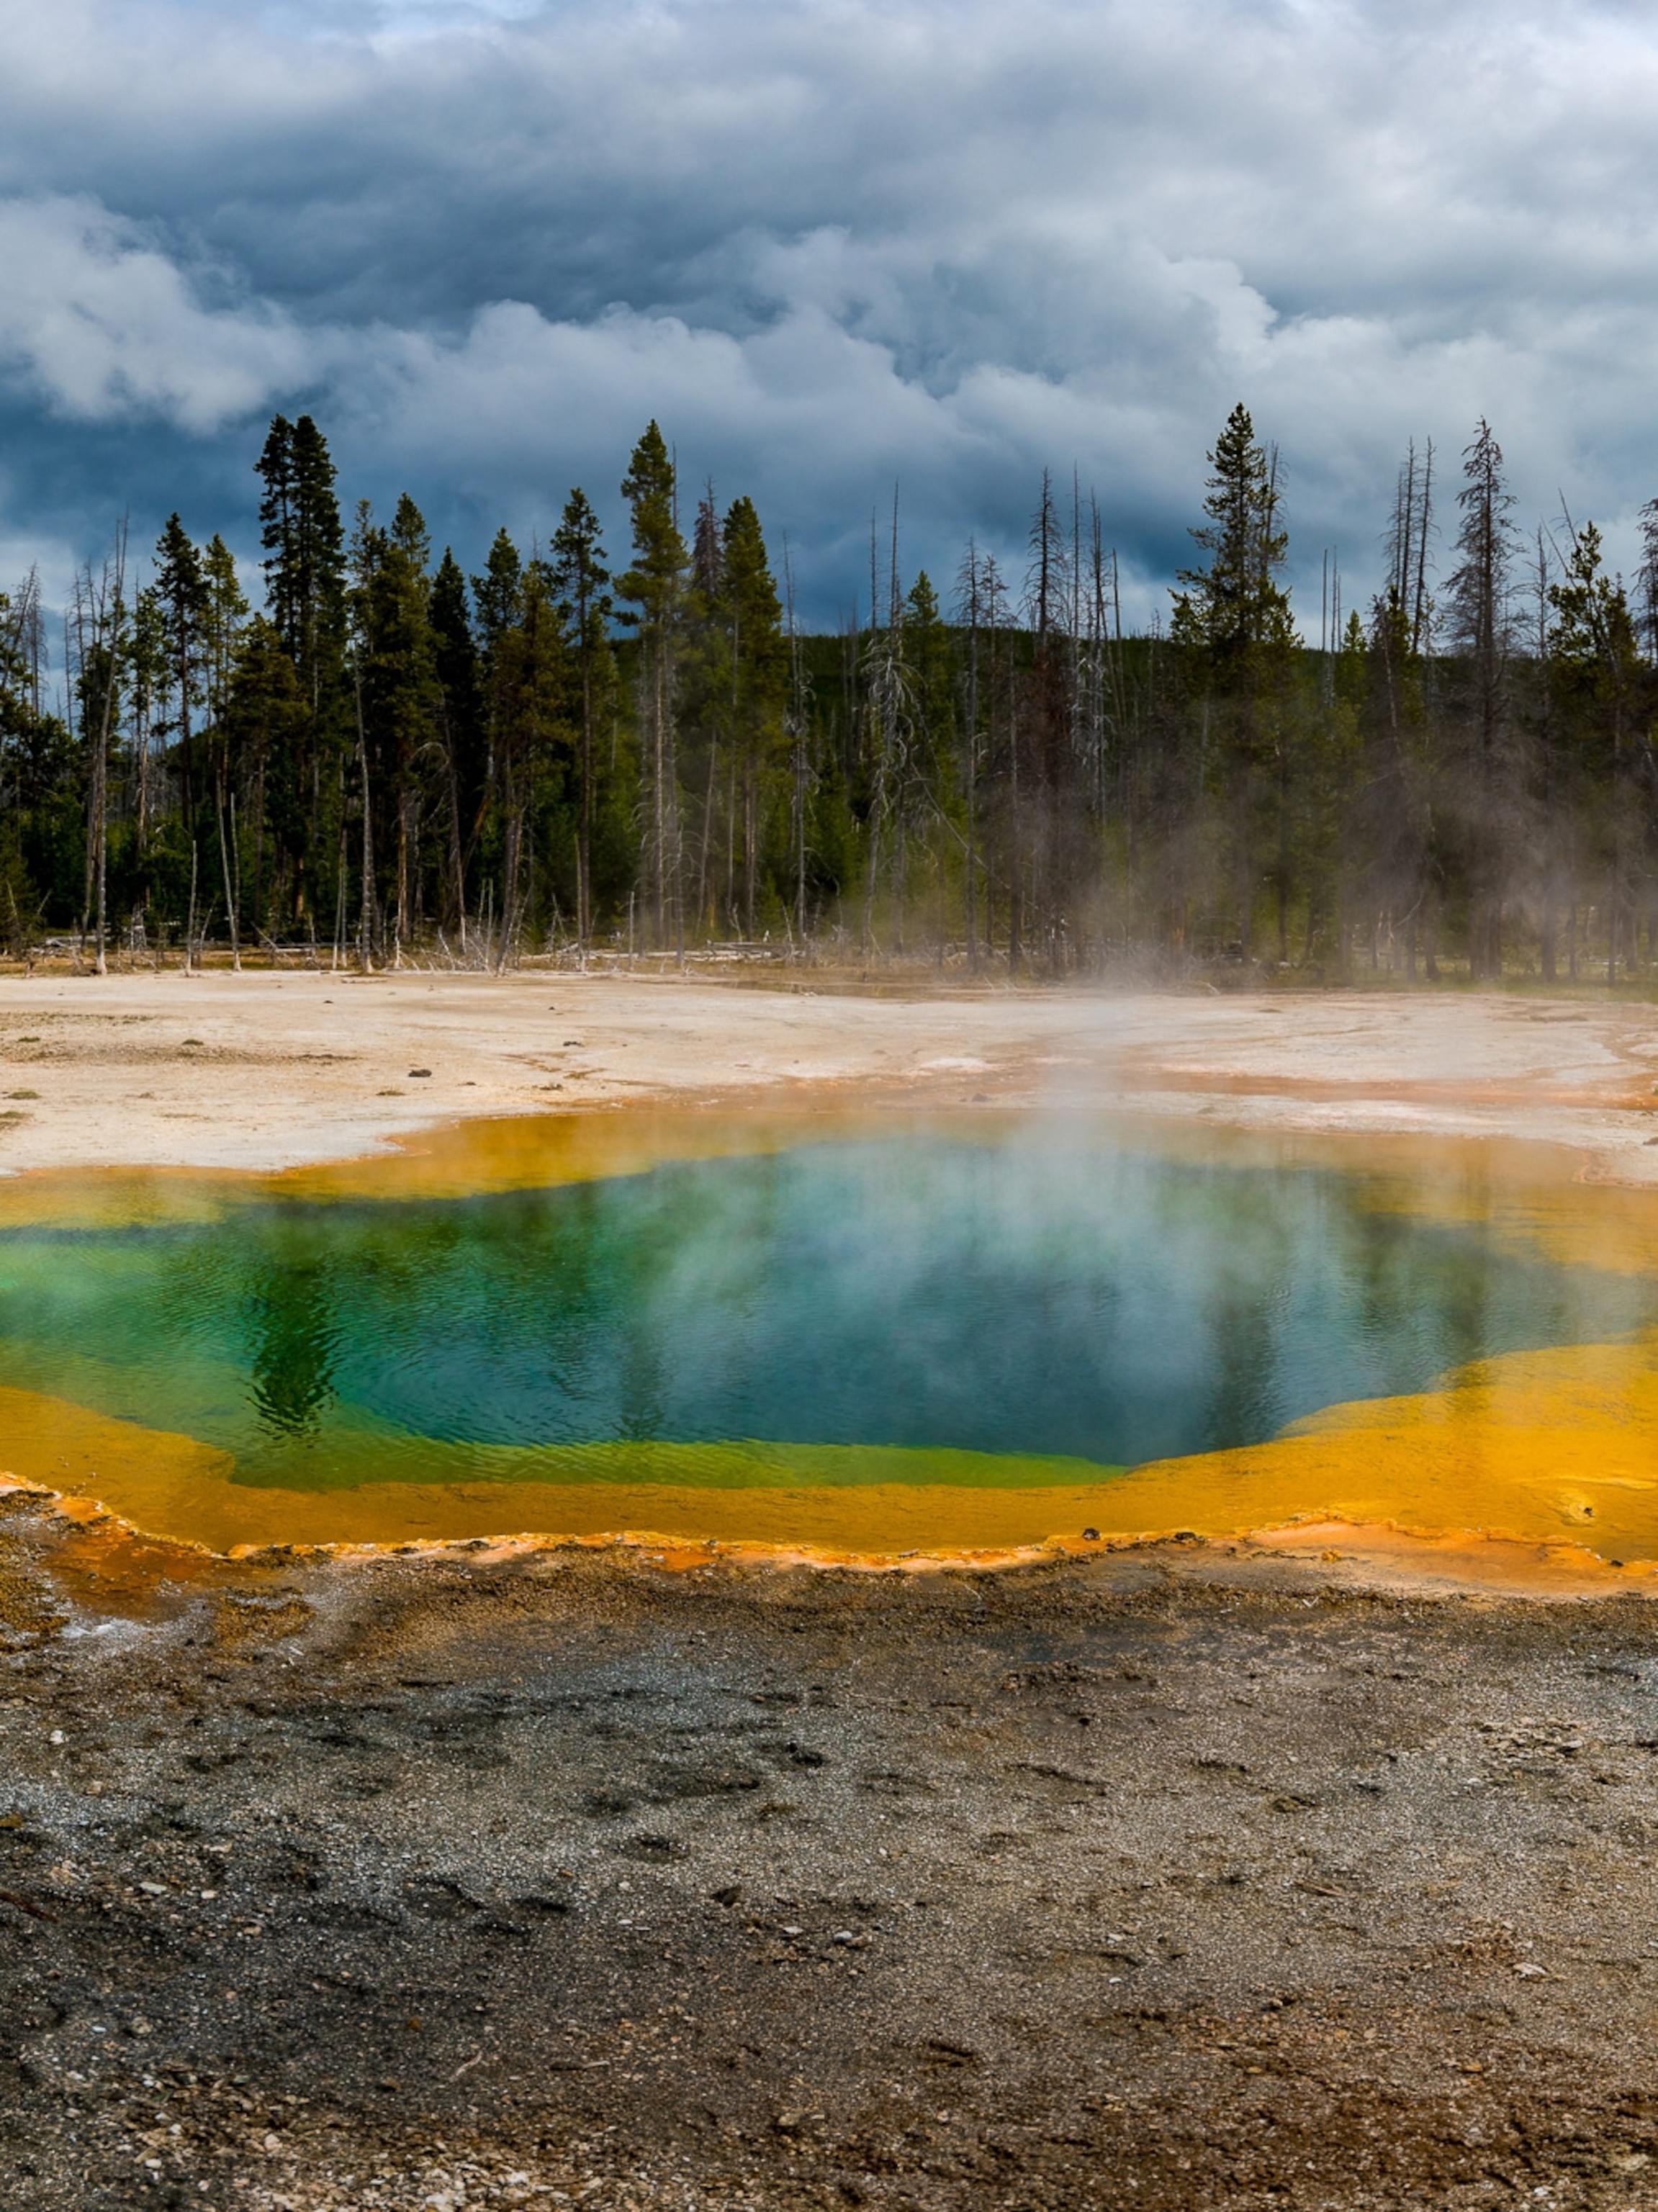 Supervolcano facts and information